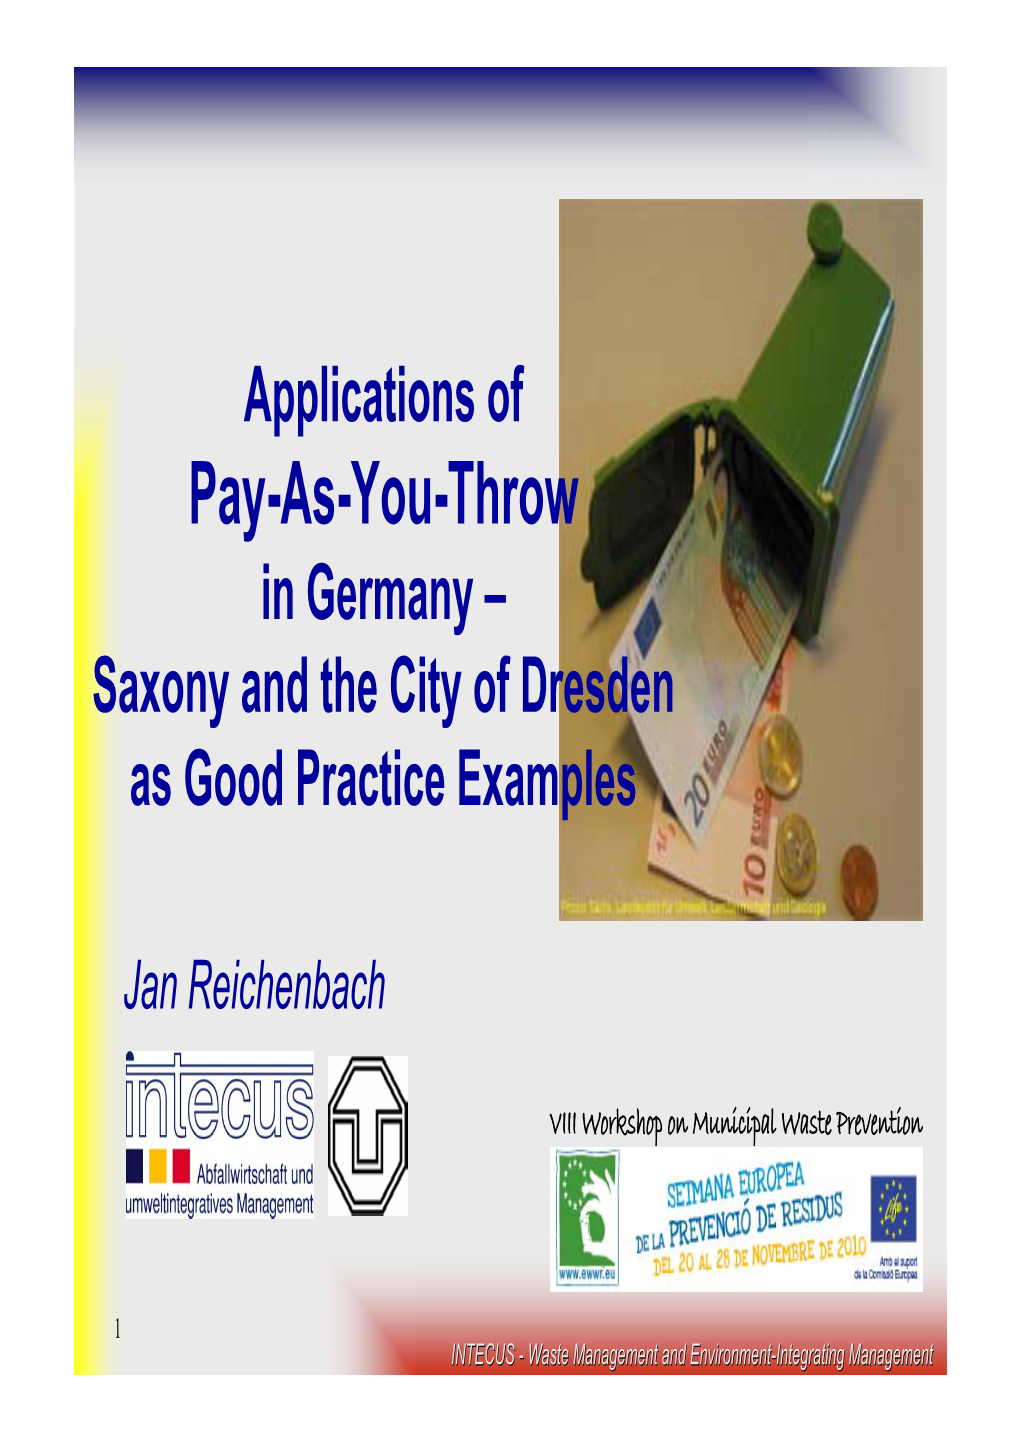 Applications of Pay-As-You-Throw in Germany – Saxony and the City of Dresden As Good Practice Examples